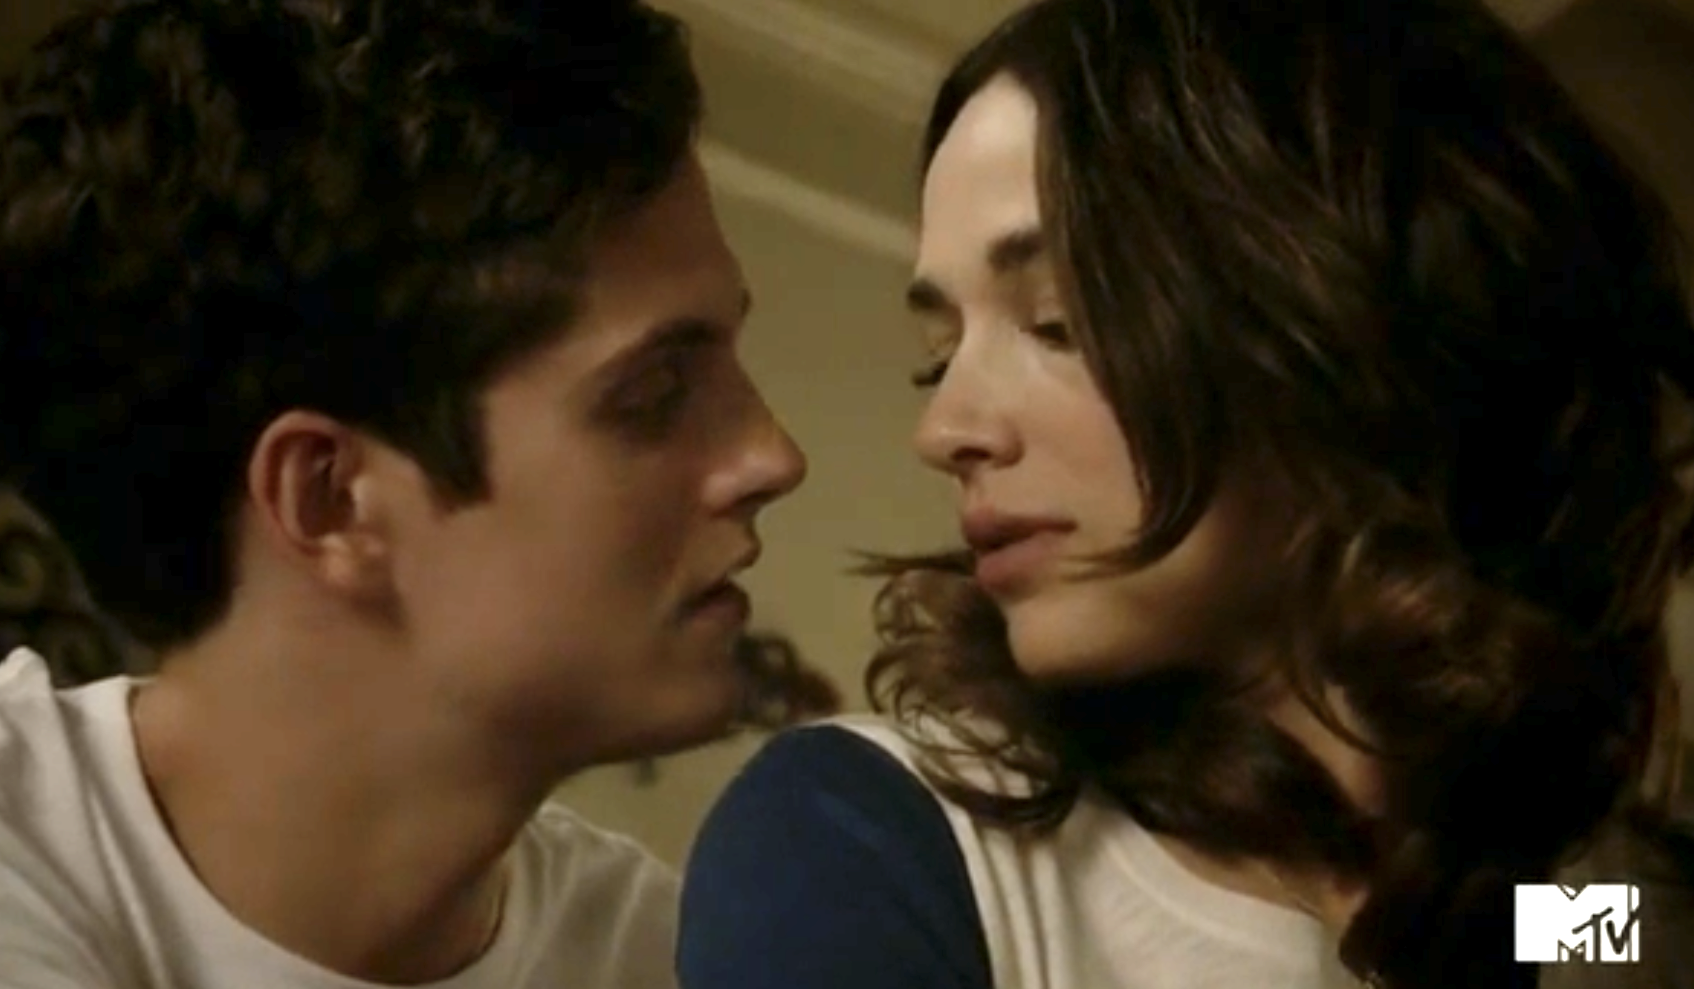 Issac about to kiss Allison